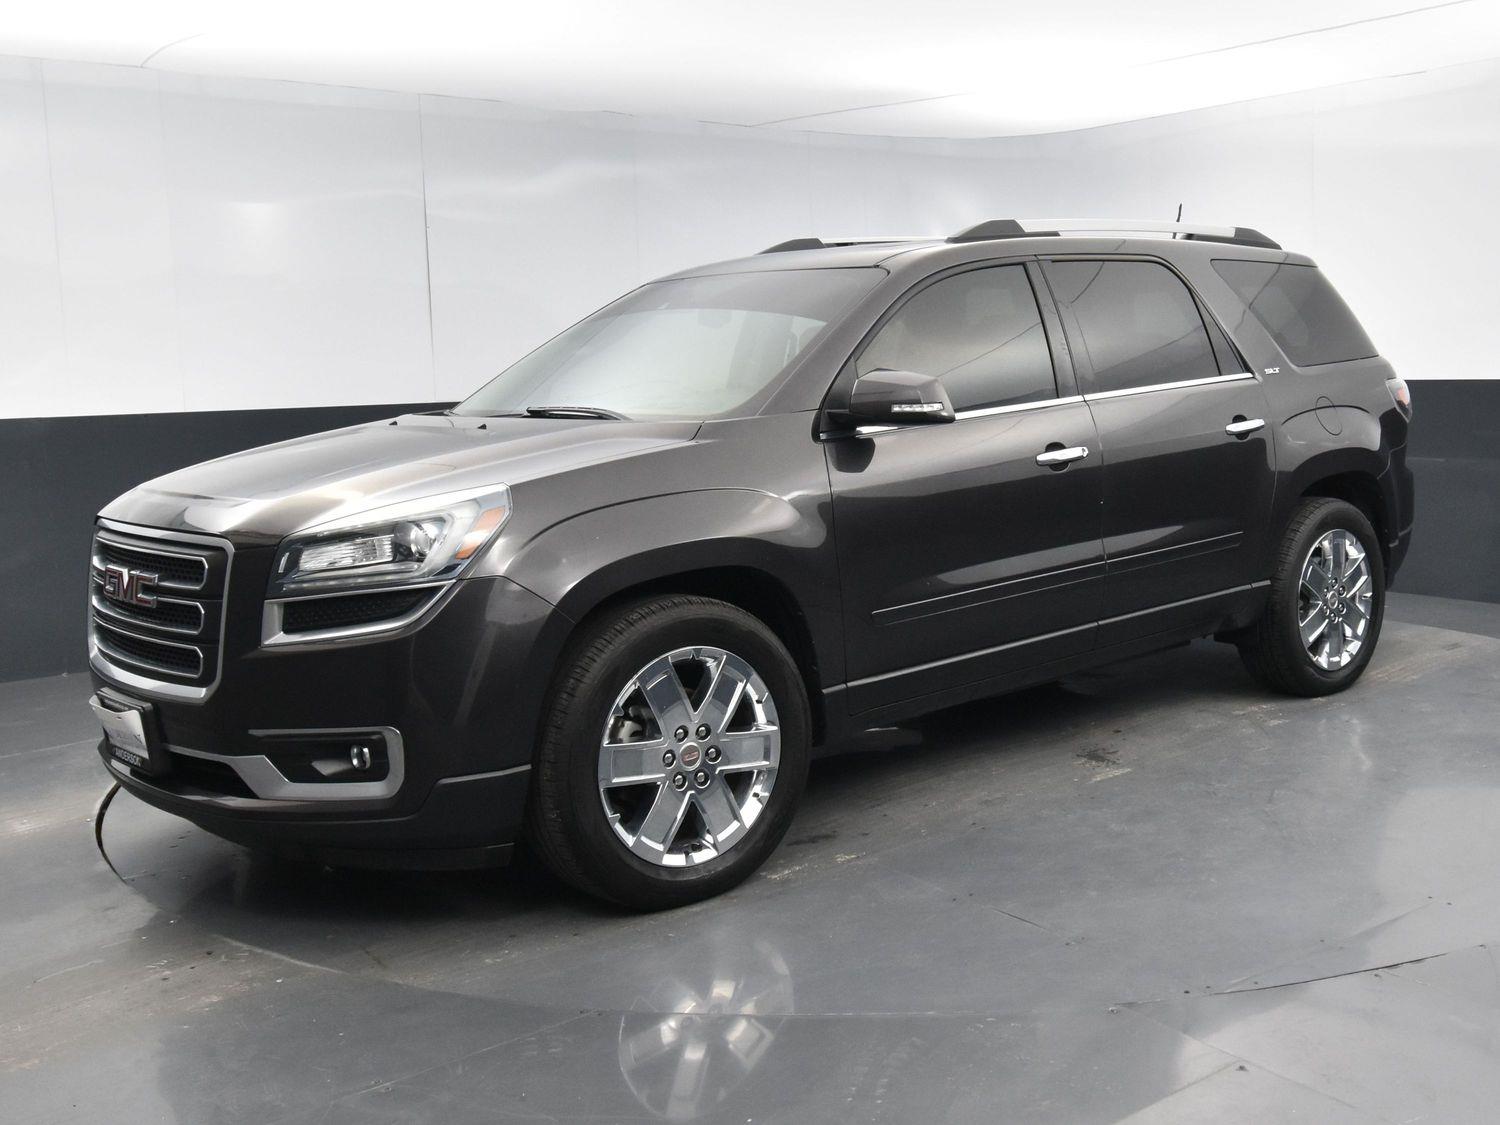 Used 2017 GMC Acadia Limited Limited 4 door for sale in Grand Island NE